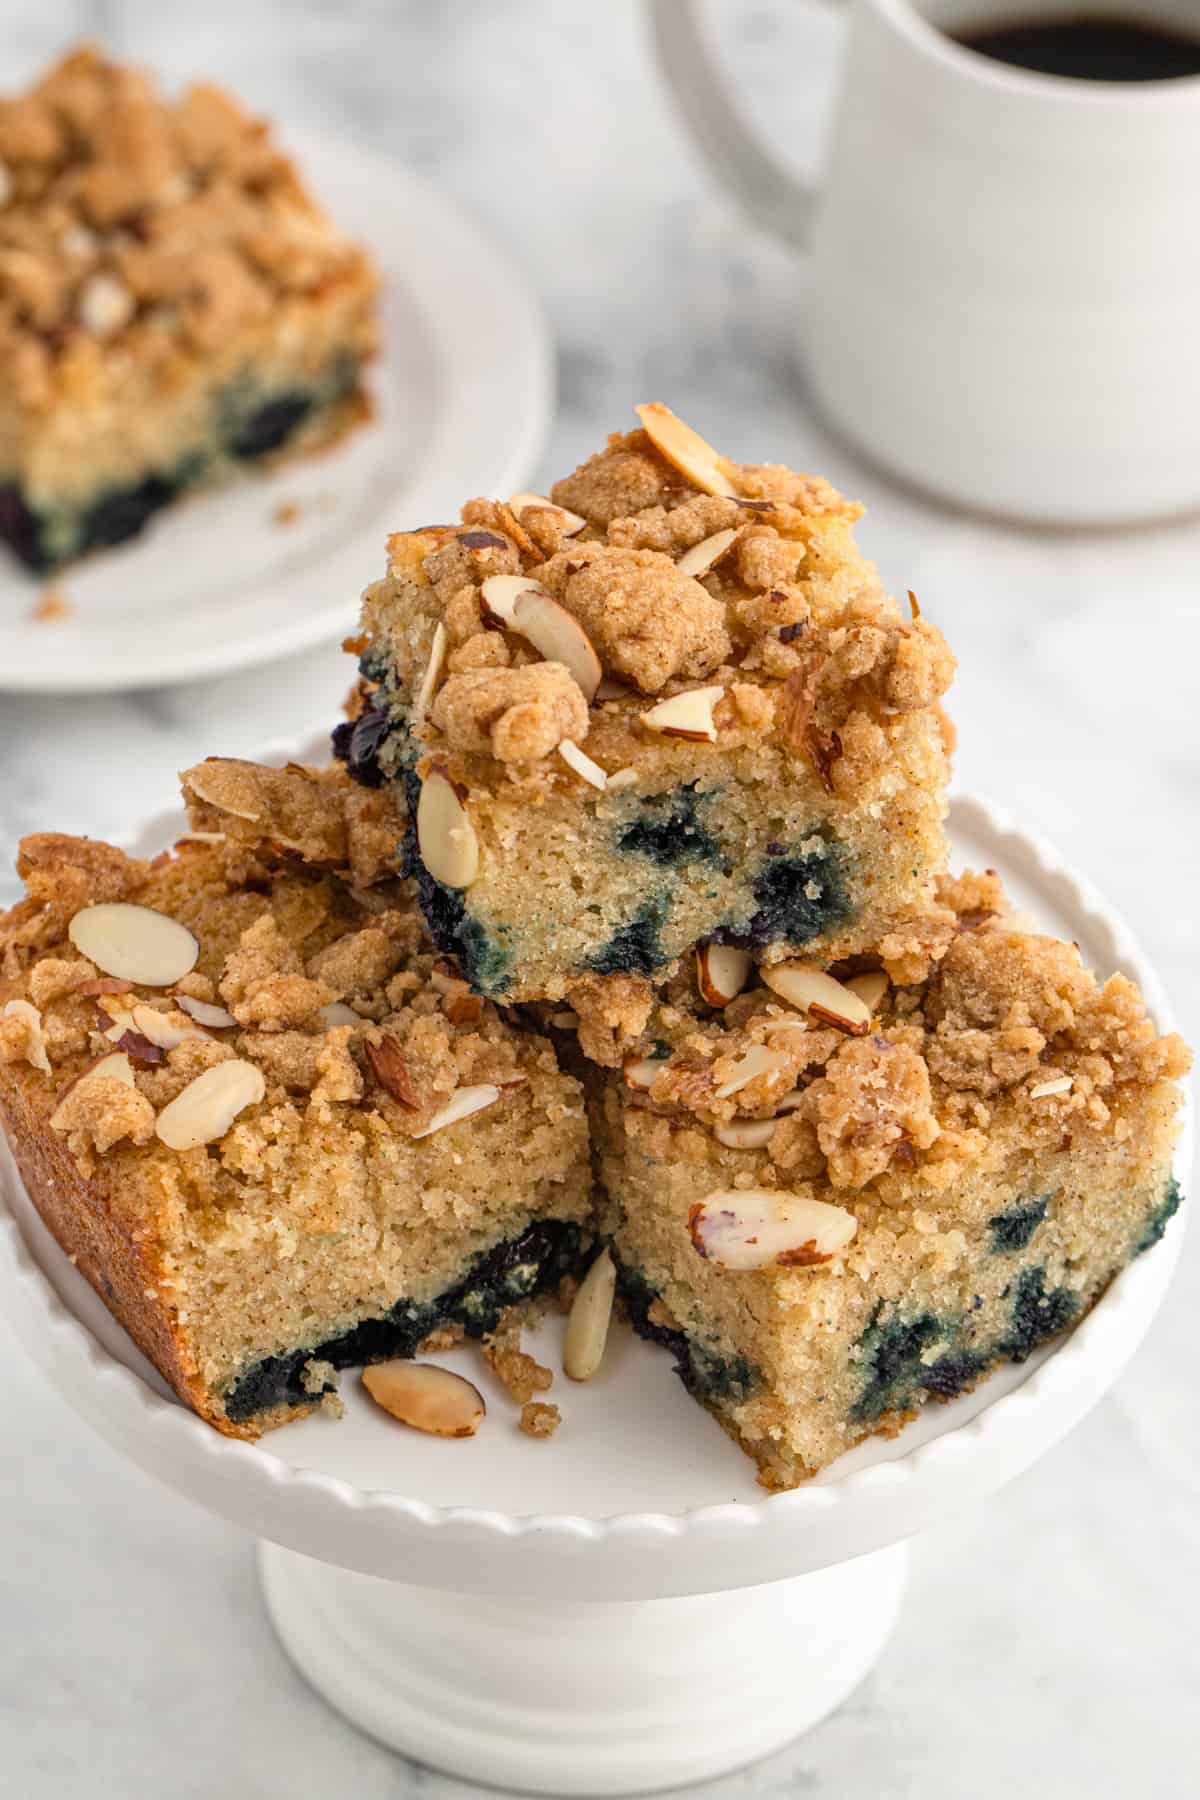 A stack of blueberry crunch cake slices on a white plate